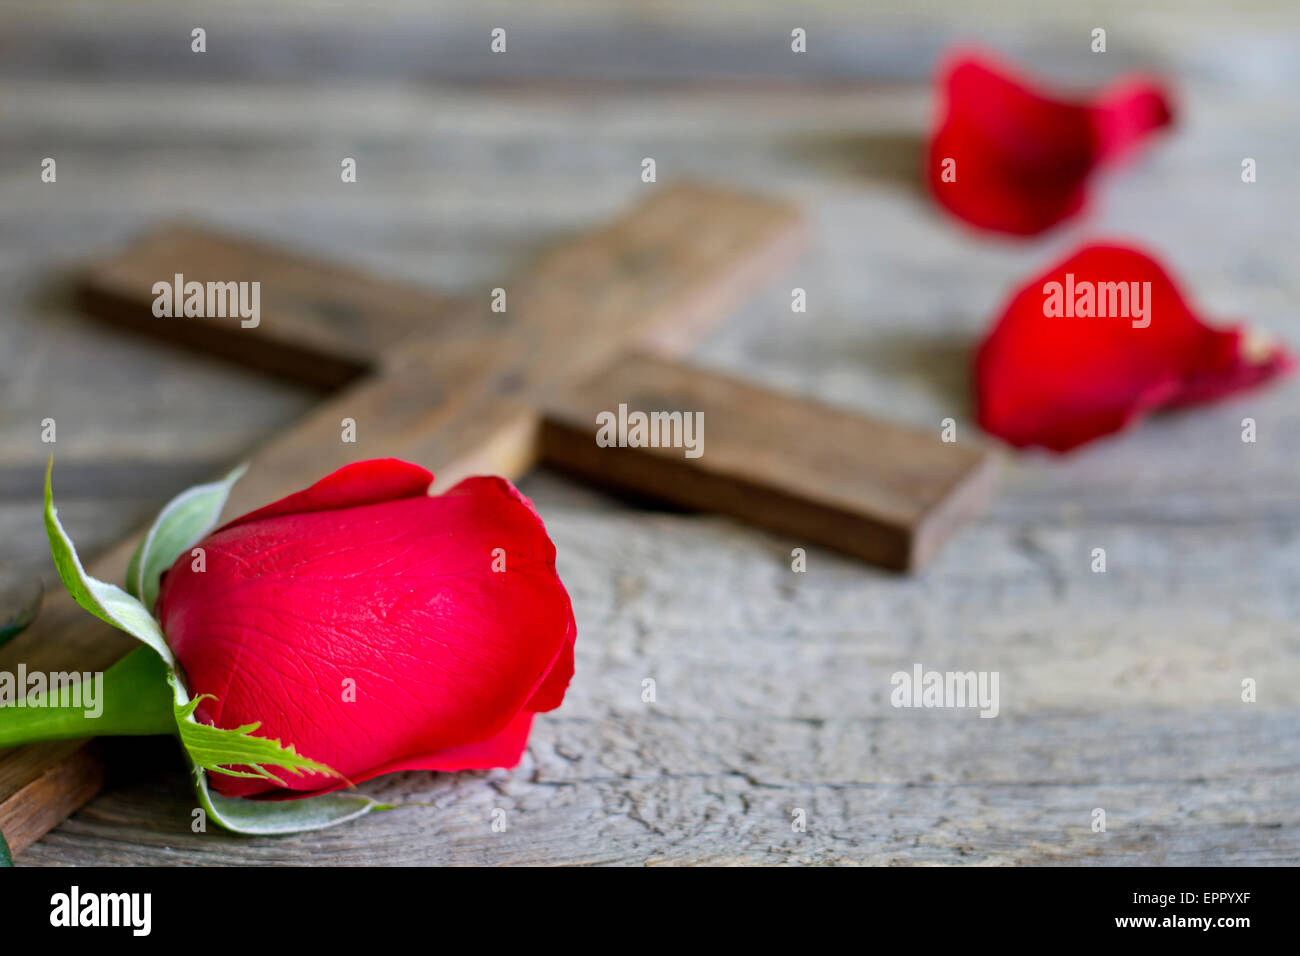 Cross and rose religion sign symbol abstract concept Stock Photo